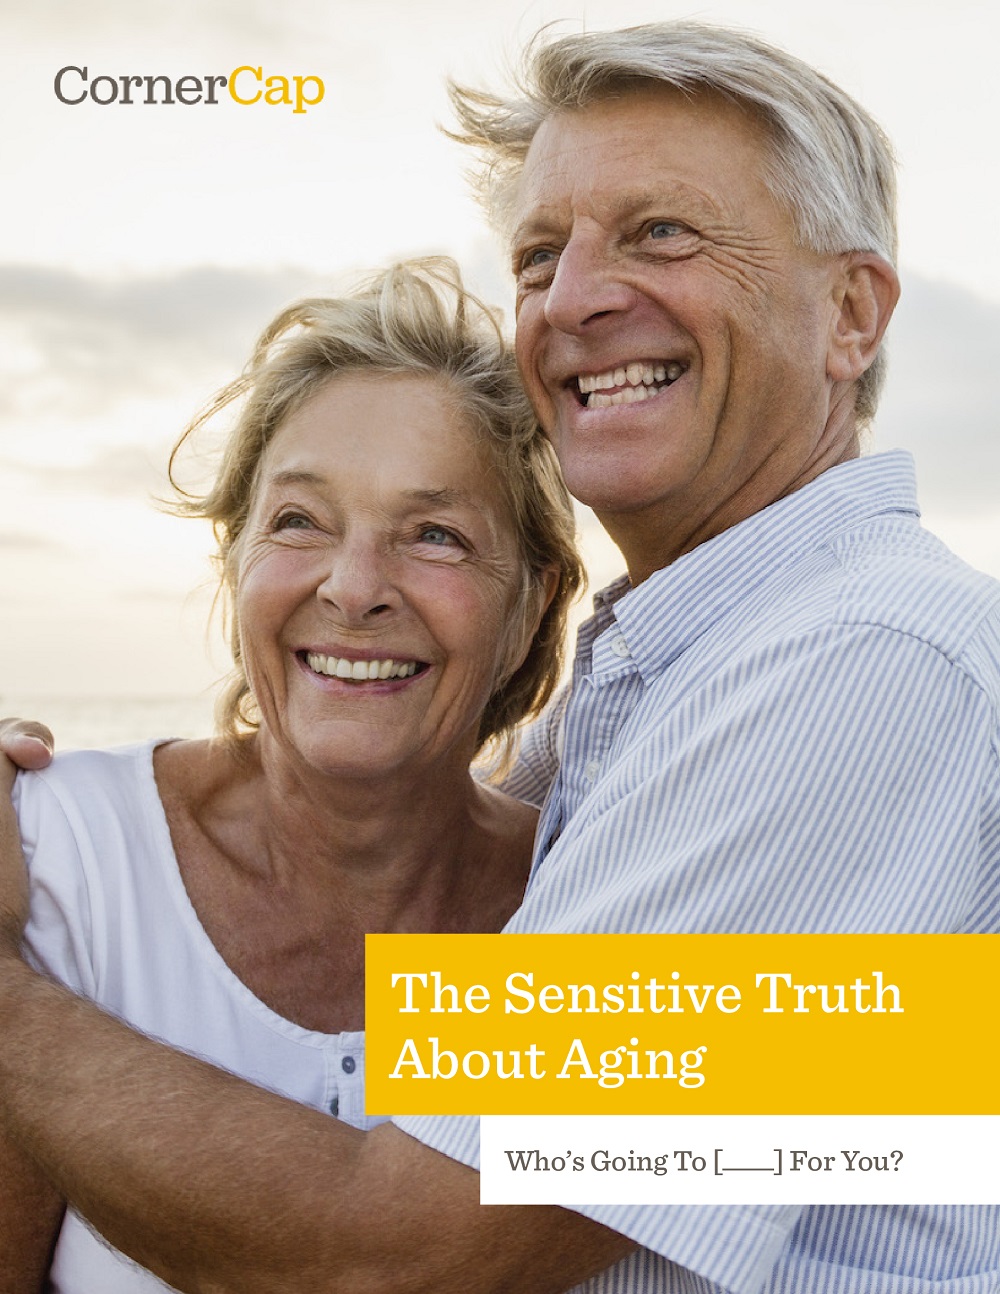 The Sensitive Truth About Aging